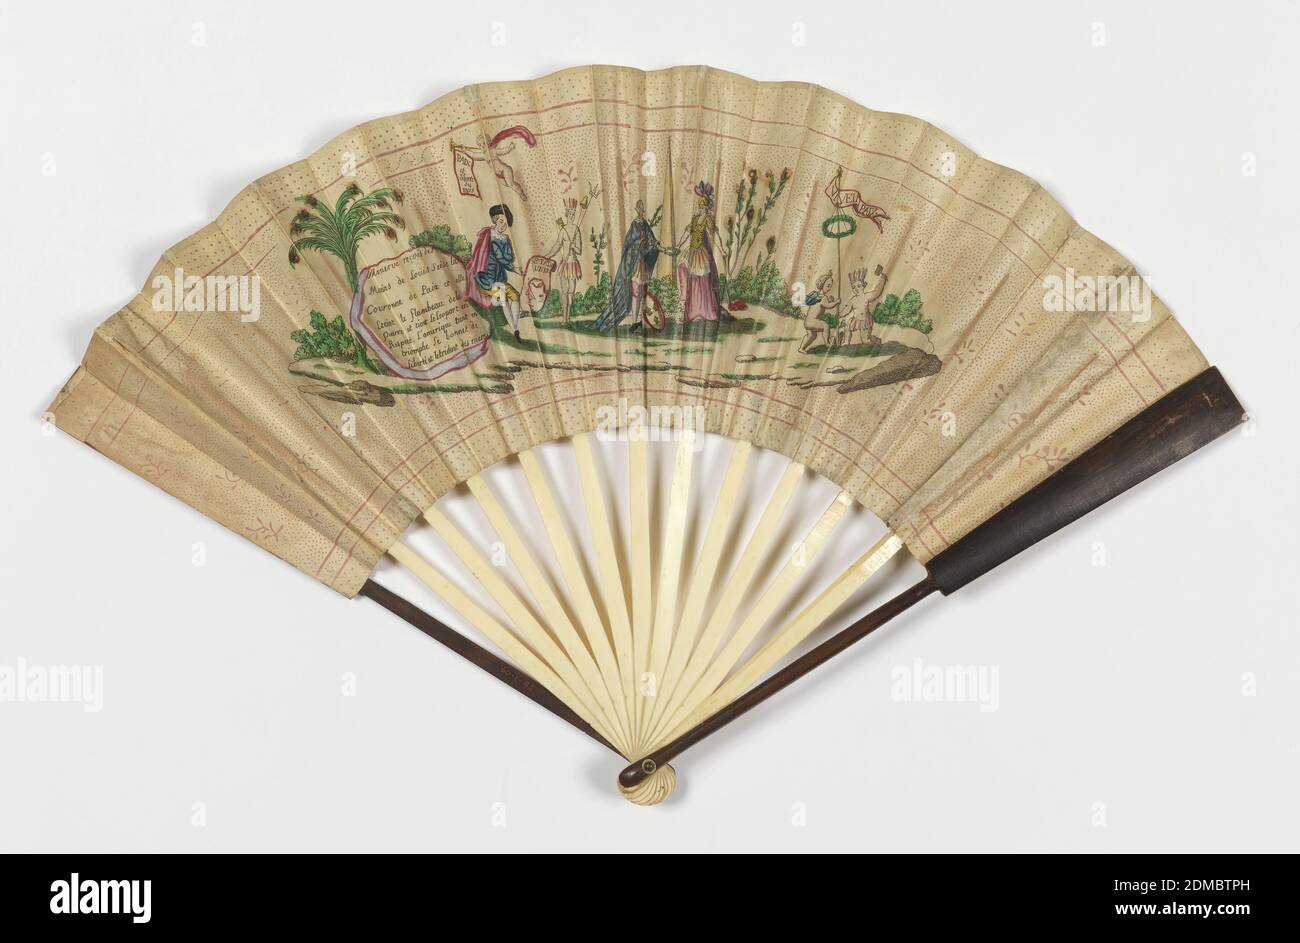 Pleated fan, Paper leaf with hand-colored engraving, ivory sticks, wood guards Background print appears to be block printed. The fan probably opriginally had metallic spangles that have deteriorated and fallen off, leaving remnants of tarnished metal in circular shapes. There is a glazing over the printed colors. Possibly gum arabic?, Pleated fan. Paper leaf with hand-colored engraving showing Minerva, with a leopard at her feet and a torch in one hand, presenting an olive branch and wreath to Louis XVI. At right are two putti, one of which is dressed as a Native Indian, holding aloft a banner Stock Photo